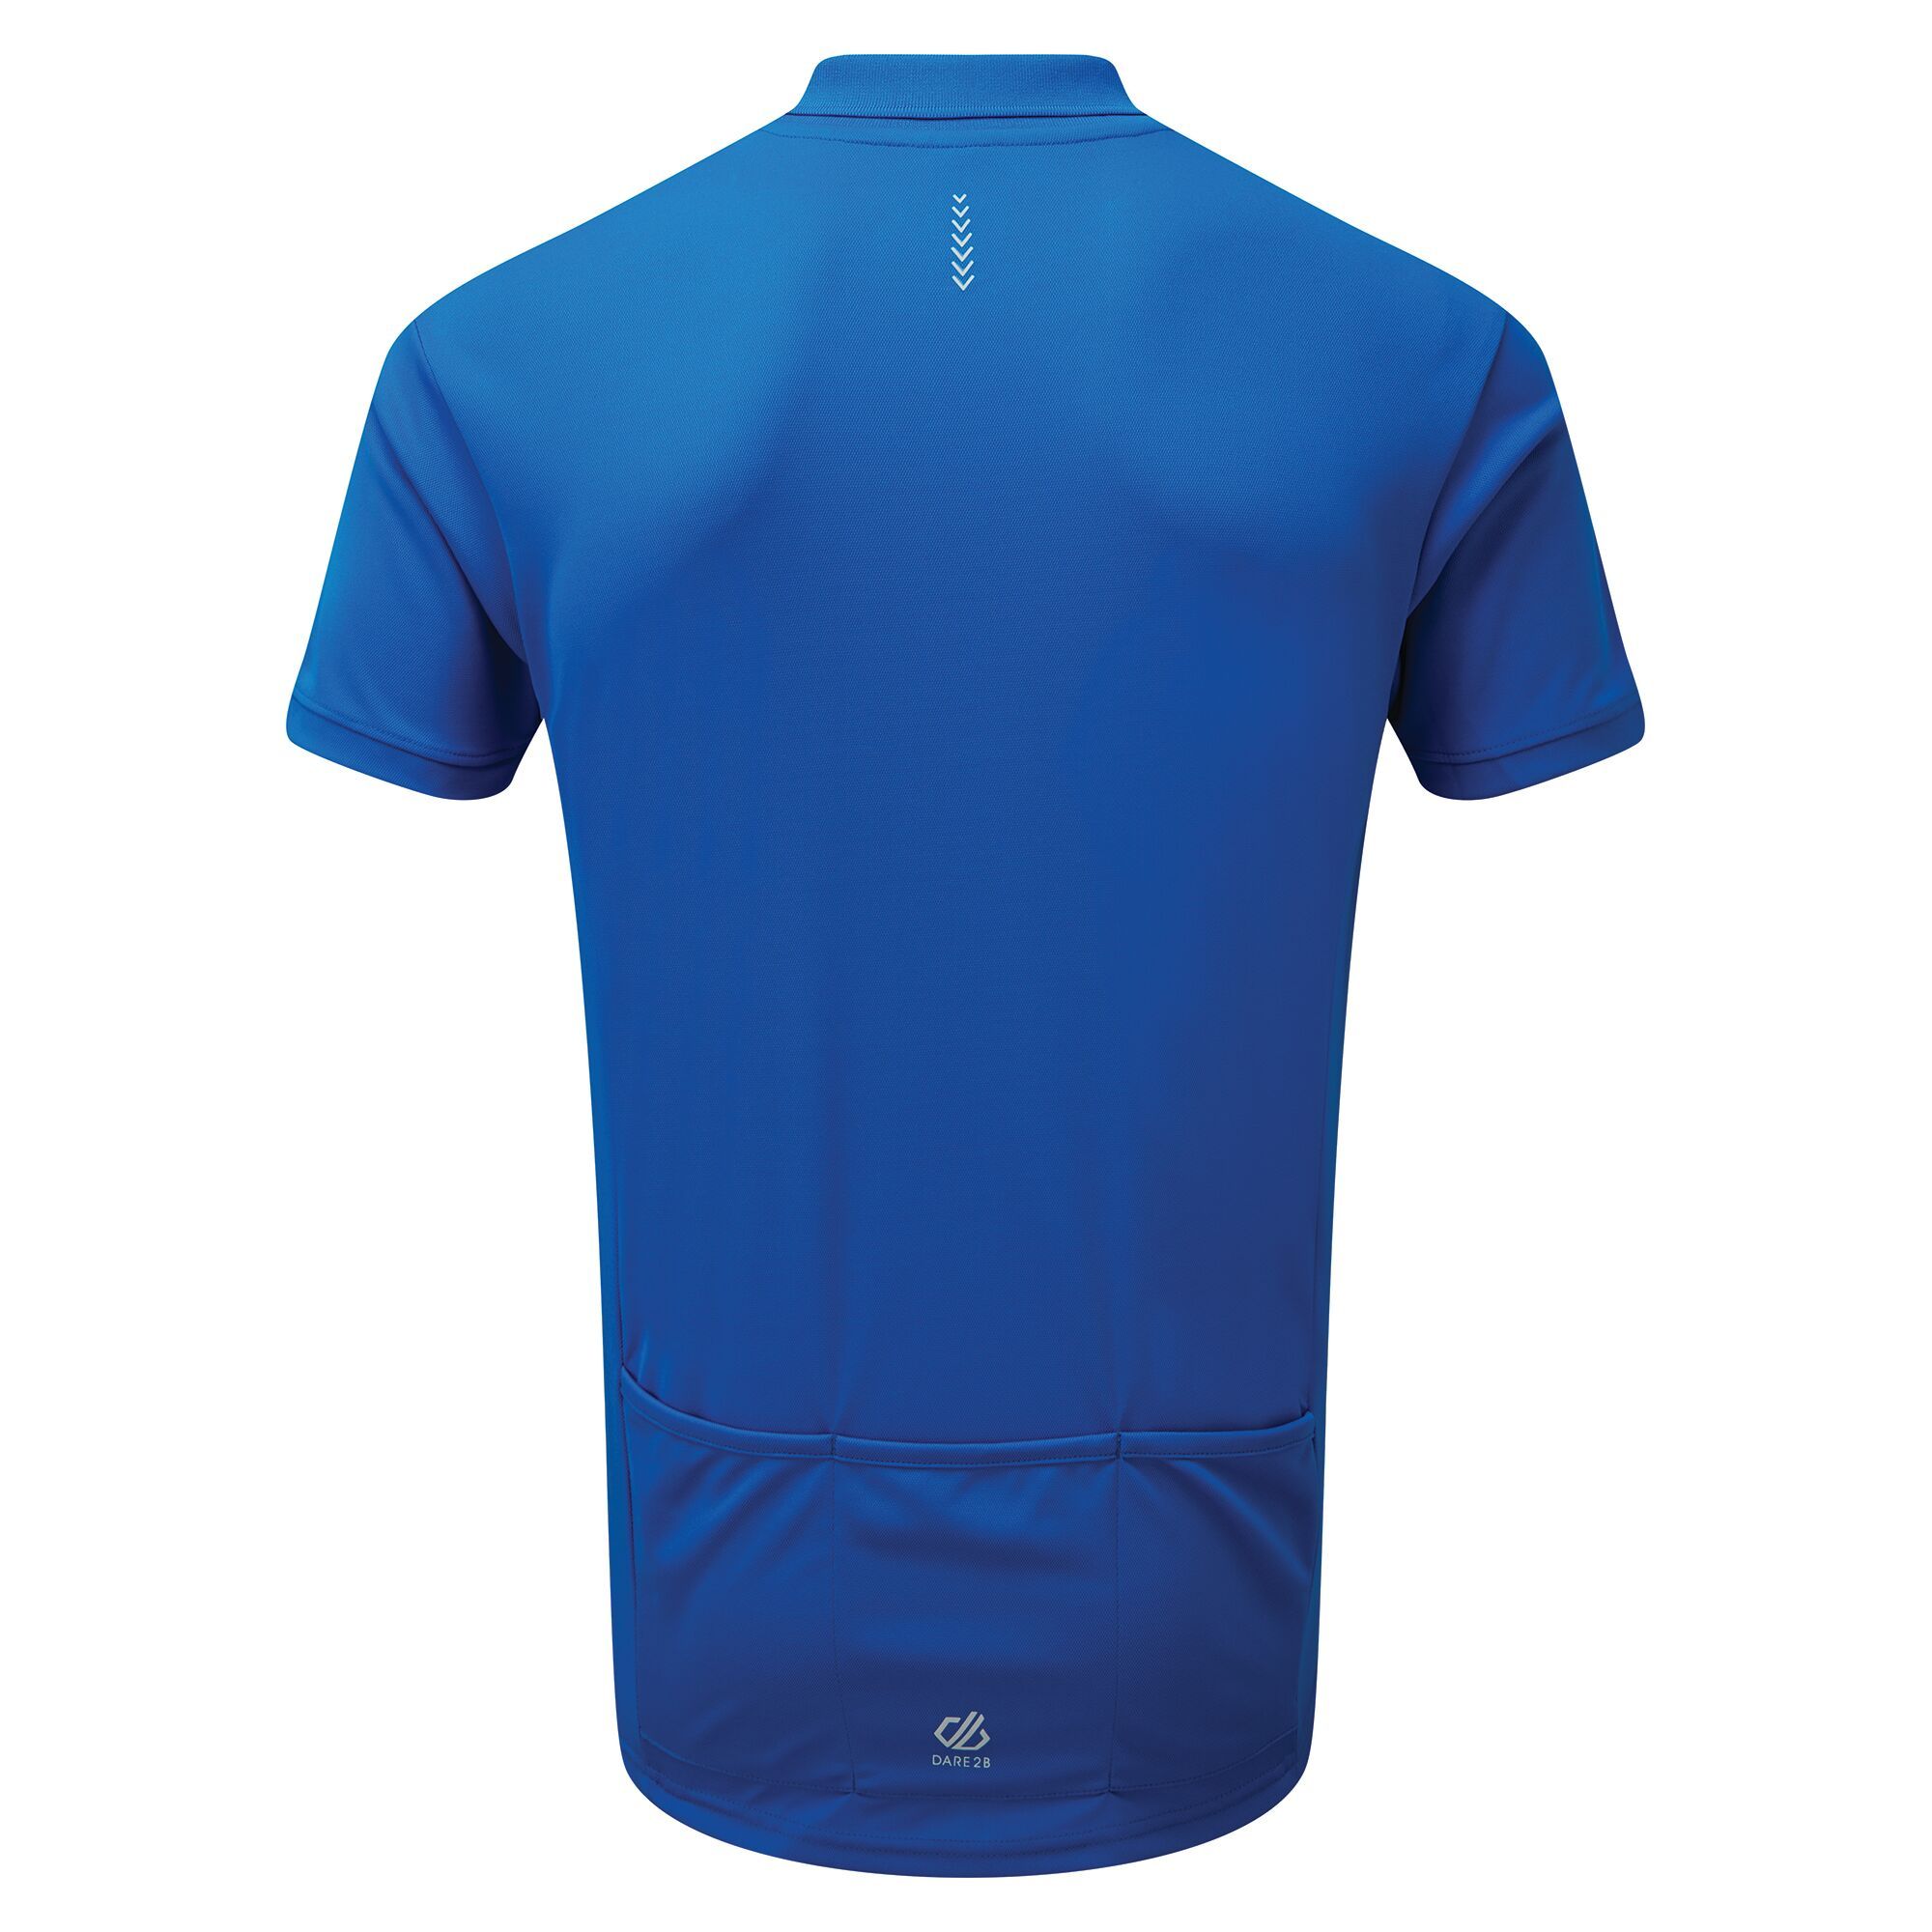 100% polyester Q-Wic plus lightweight pique fabric.  odour control treatment. Good wicking performance. Ribbed collar. 3 button placket. 3 compartment pockets at rear. Reflective detail for enhanced visibility.